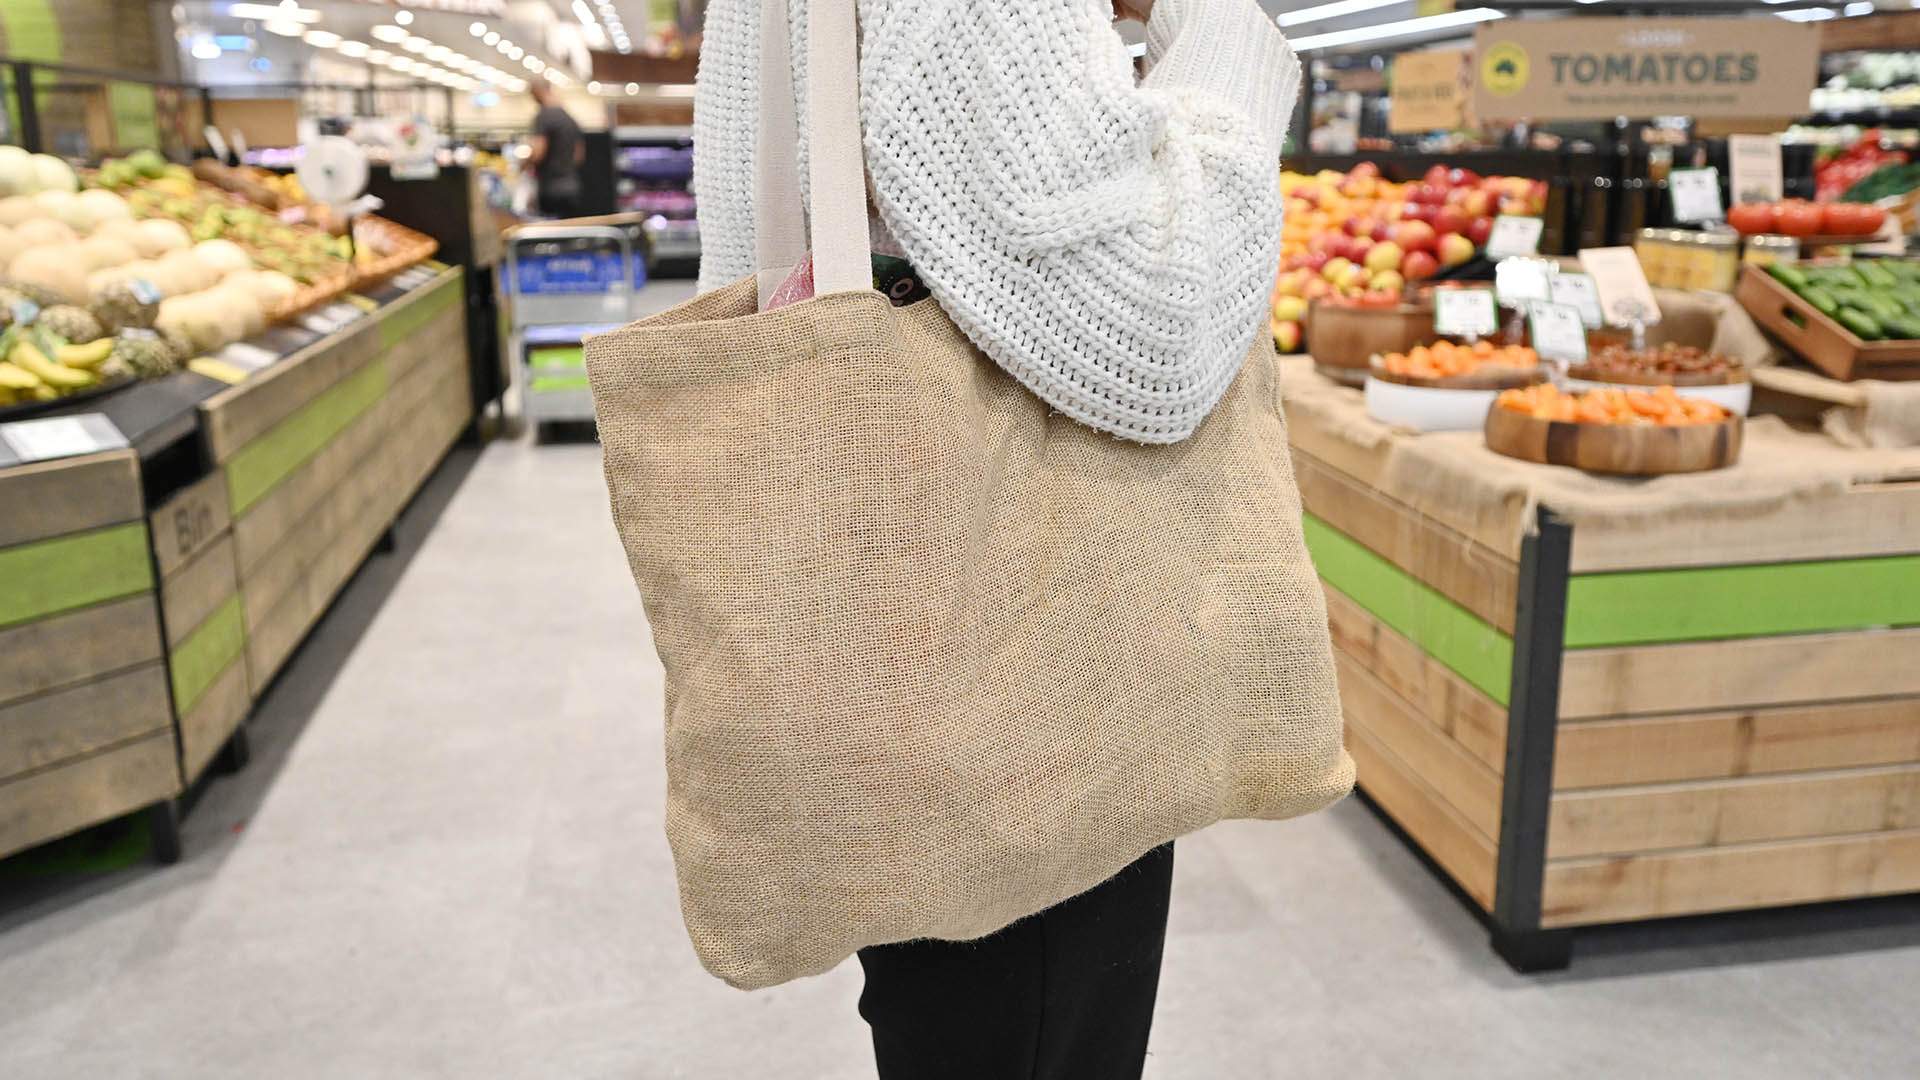 Big W joins major supermarkets in phasing out plastic bags